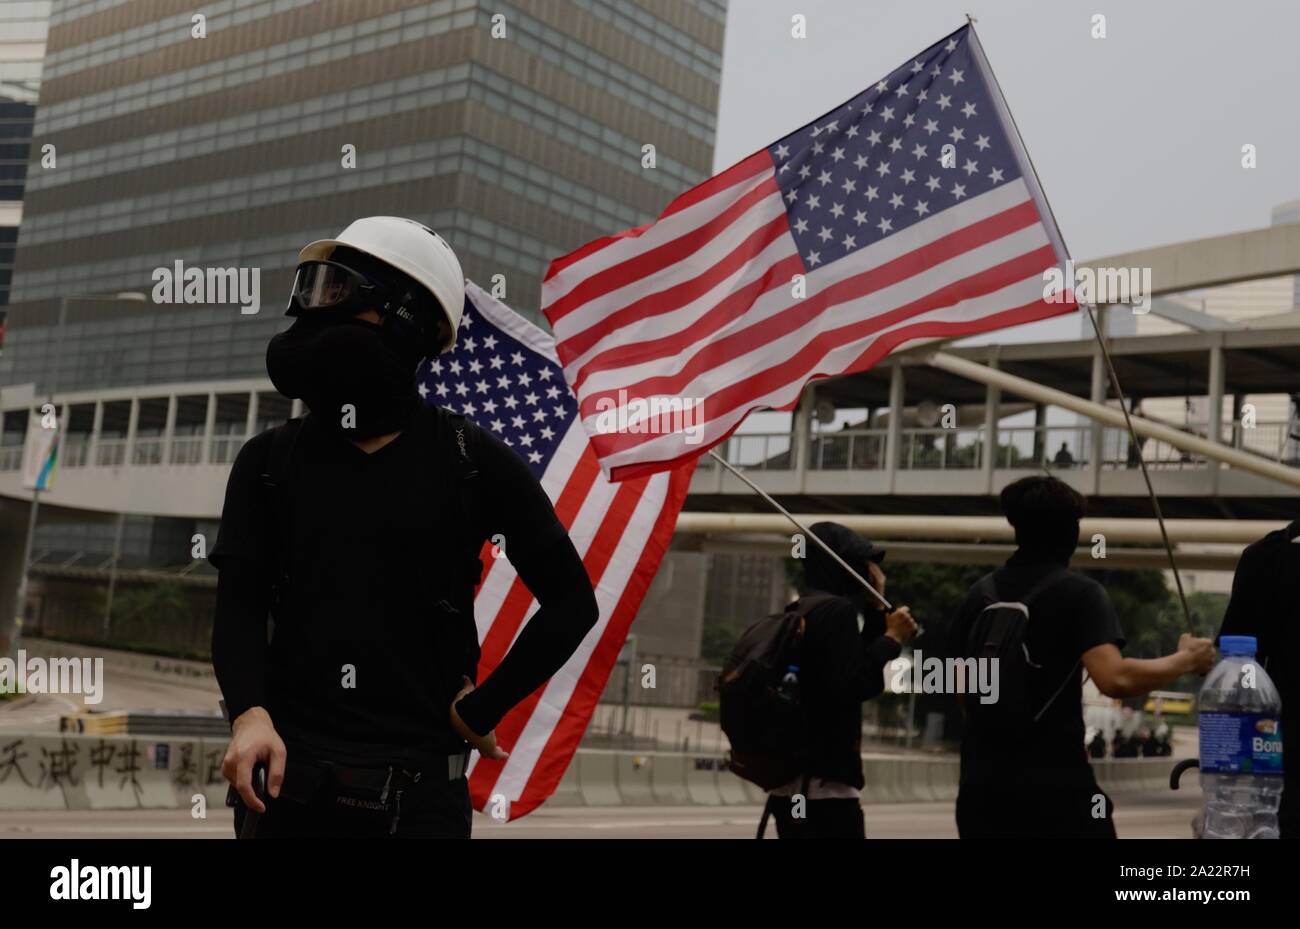 Hong Kong, CHINA. 29th Sep, 2019. Today marks 70th anniversary of founding of PRC. Meanwhile in HK, protests continue without sign of dissipation.( File ) Sept-29, 2019 Hong Kong.ZUMA/Liau Chung-ren Credit: Liau Chung-ren/ZUMA Wire/Alamy Live News Stock Photo